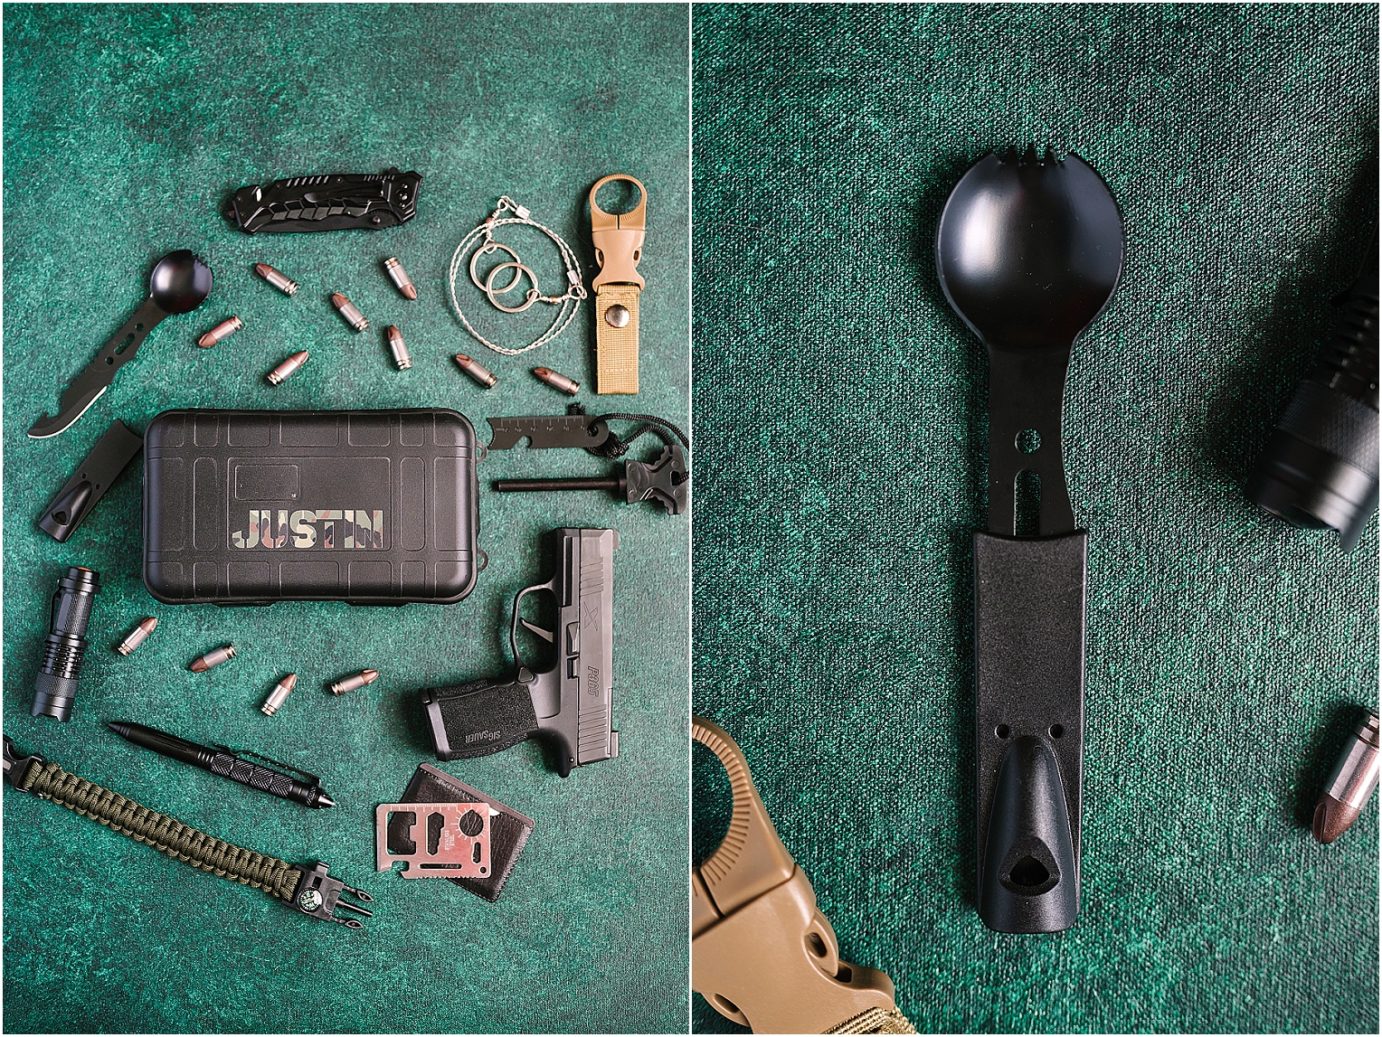 Best Groomsmen Gifts For emergency kit spoon with whistle cover